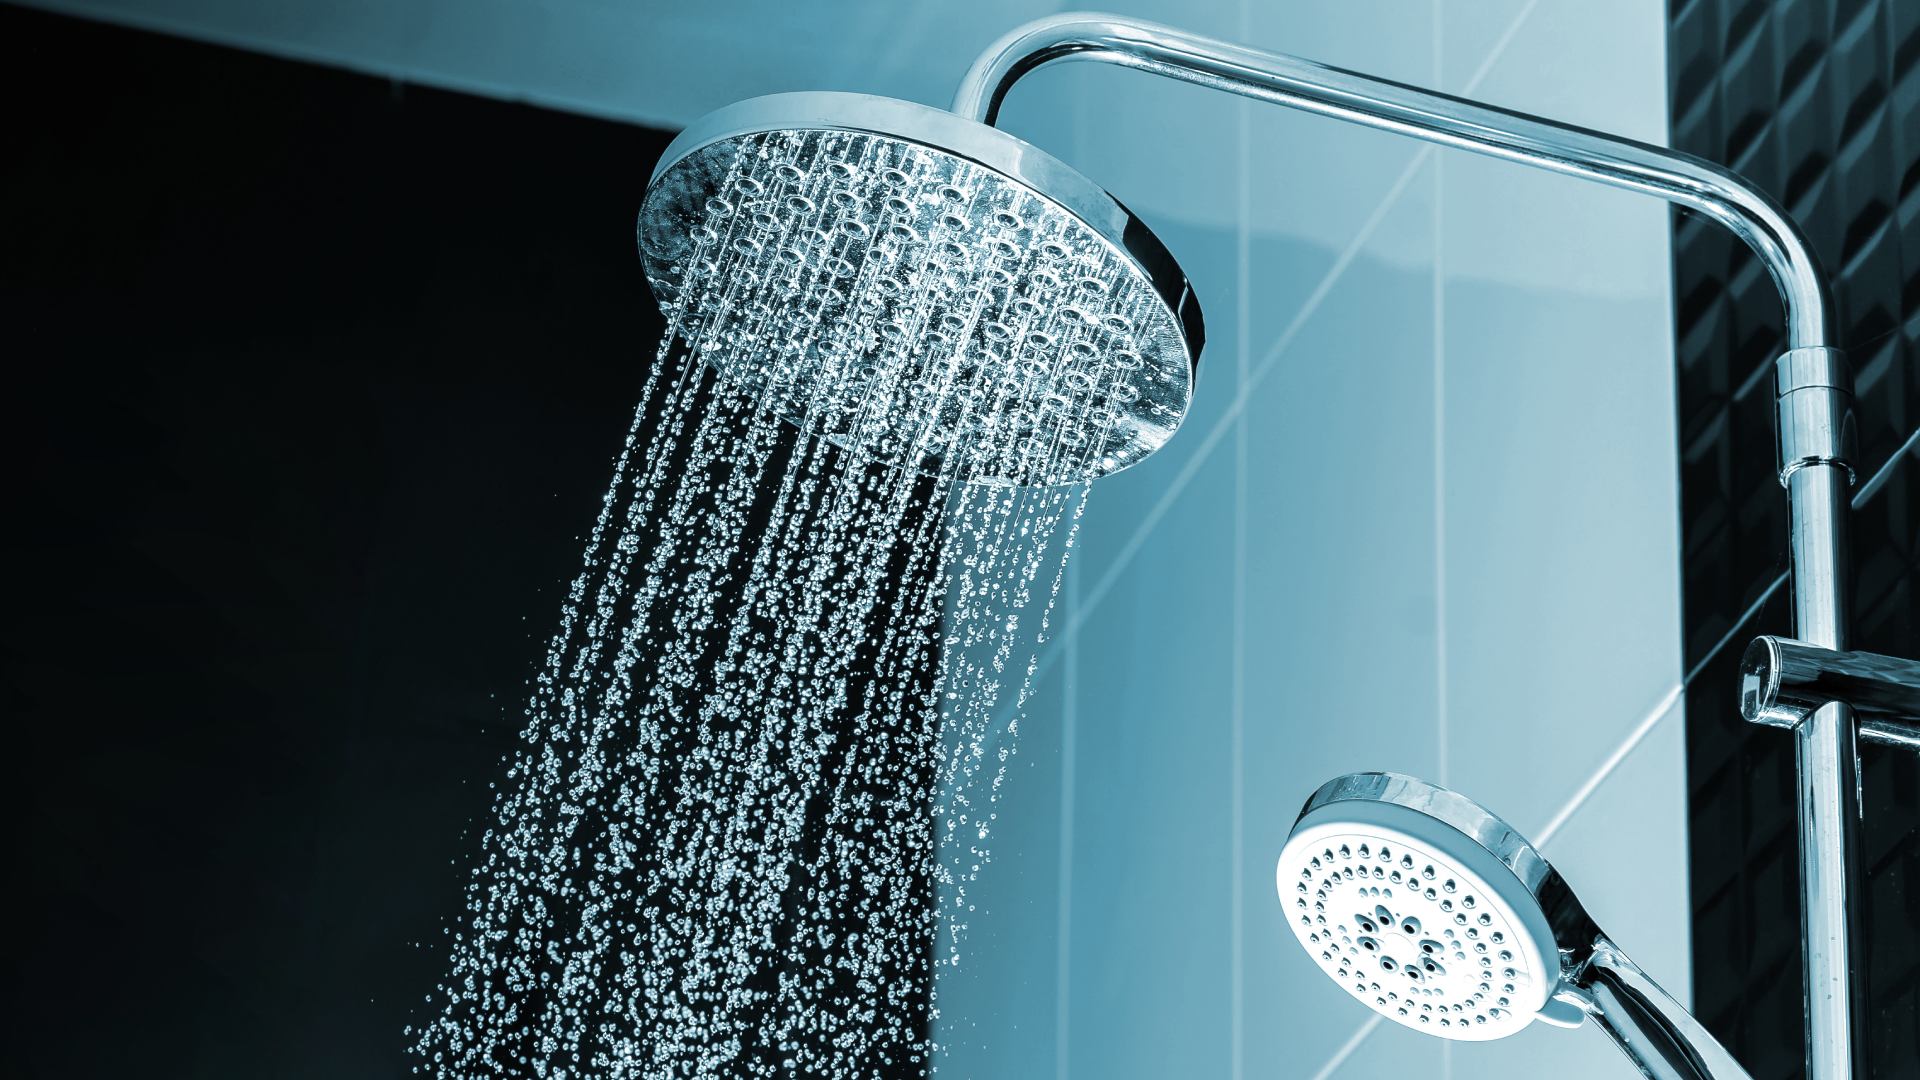 Can Your Shower Be Repaired or Does it Need to Be Replaced?